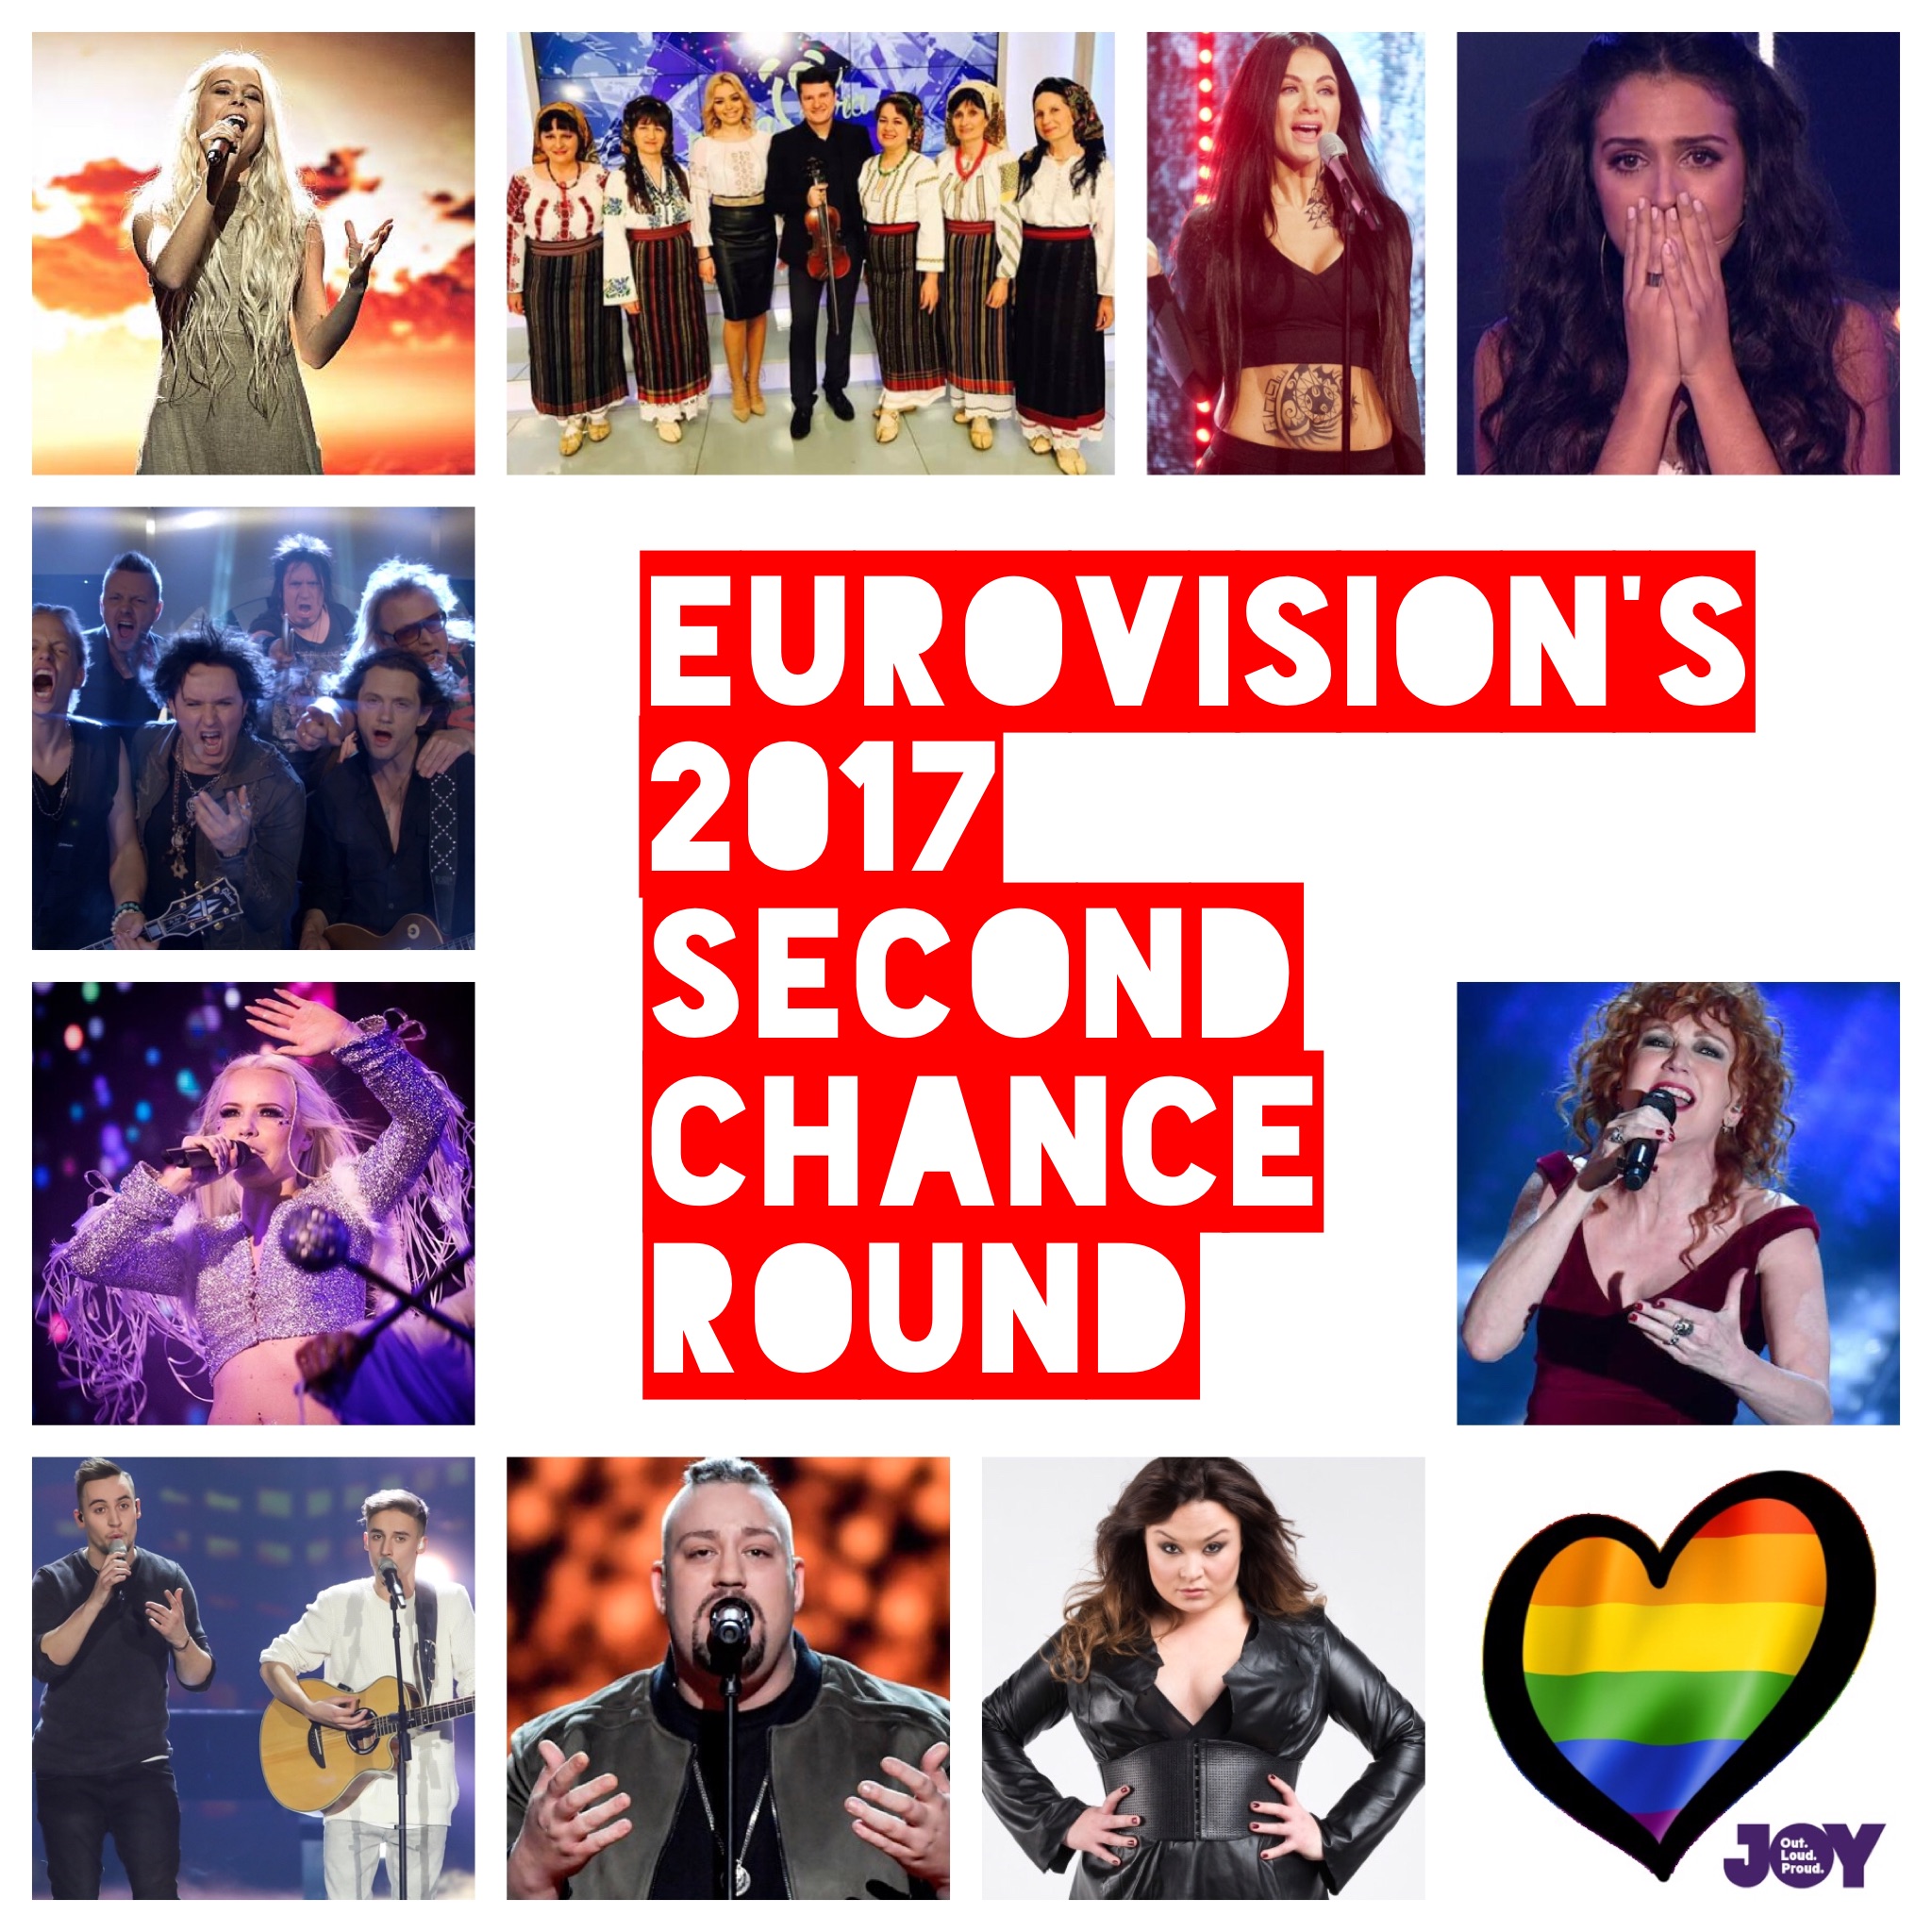 2017’s Eurovision Second Chance Round